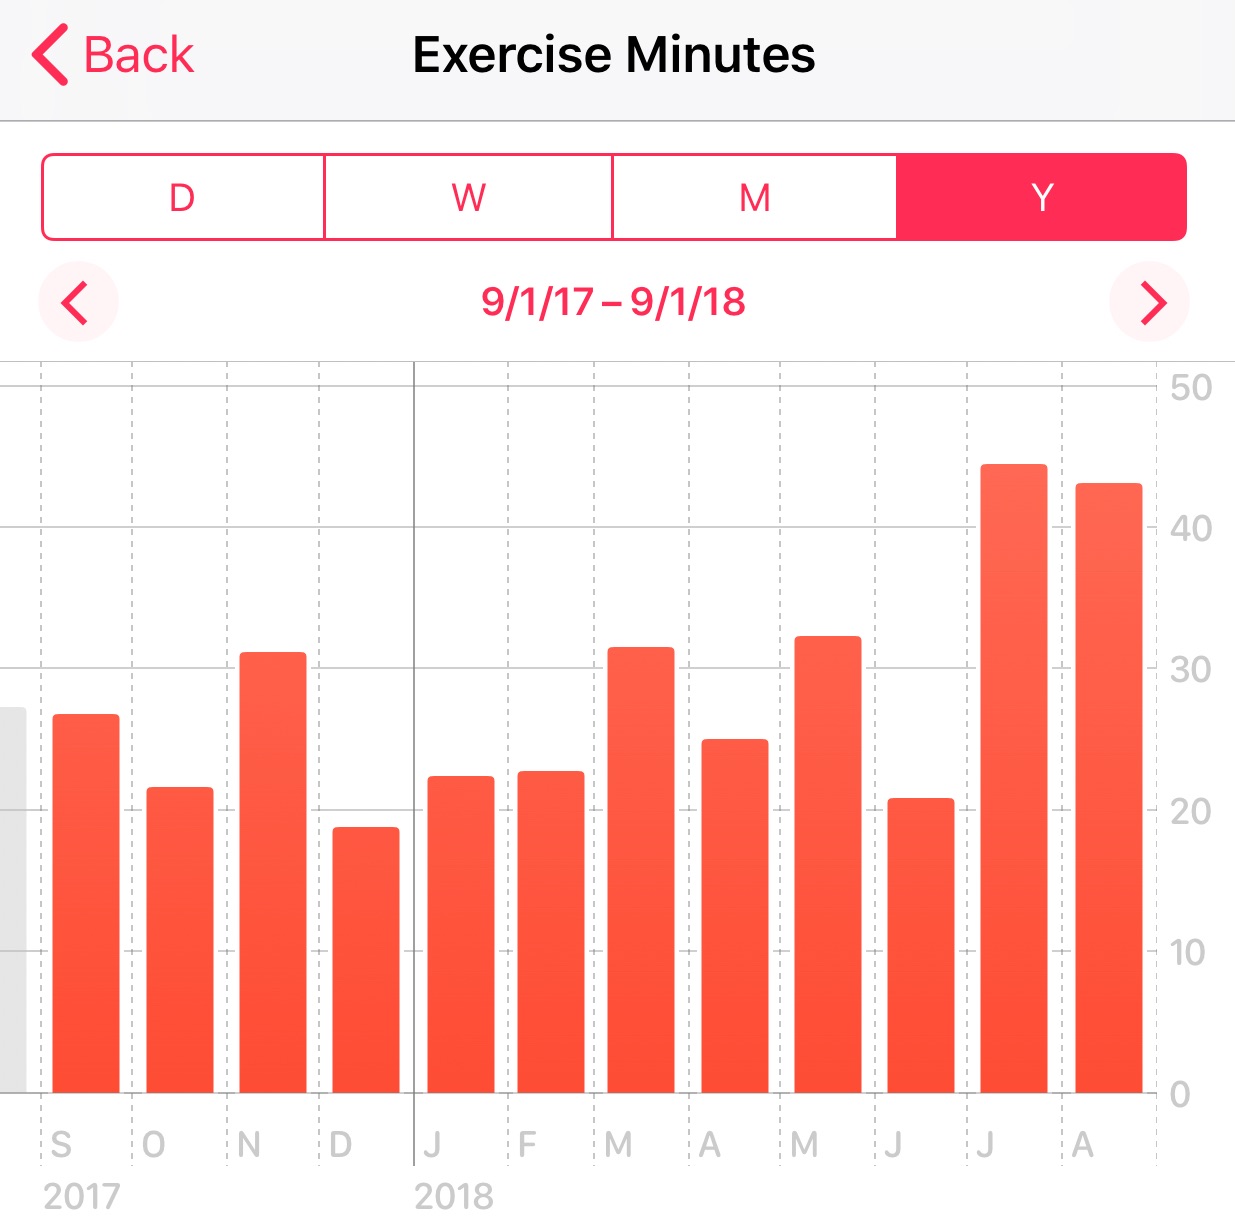 Daily exercise minutes trending